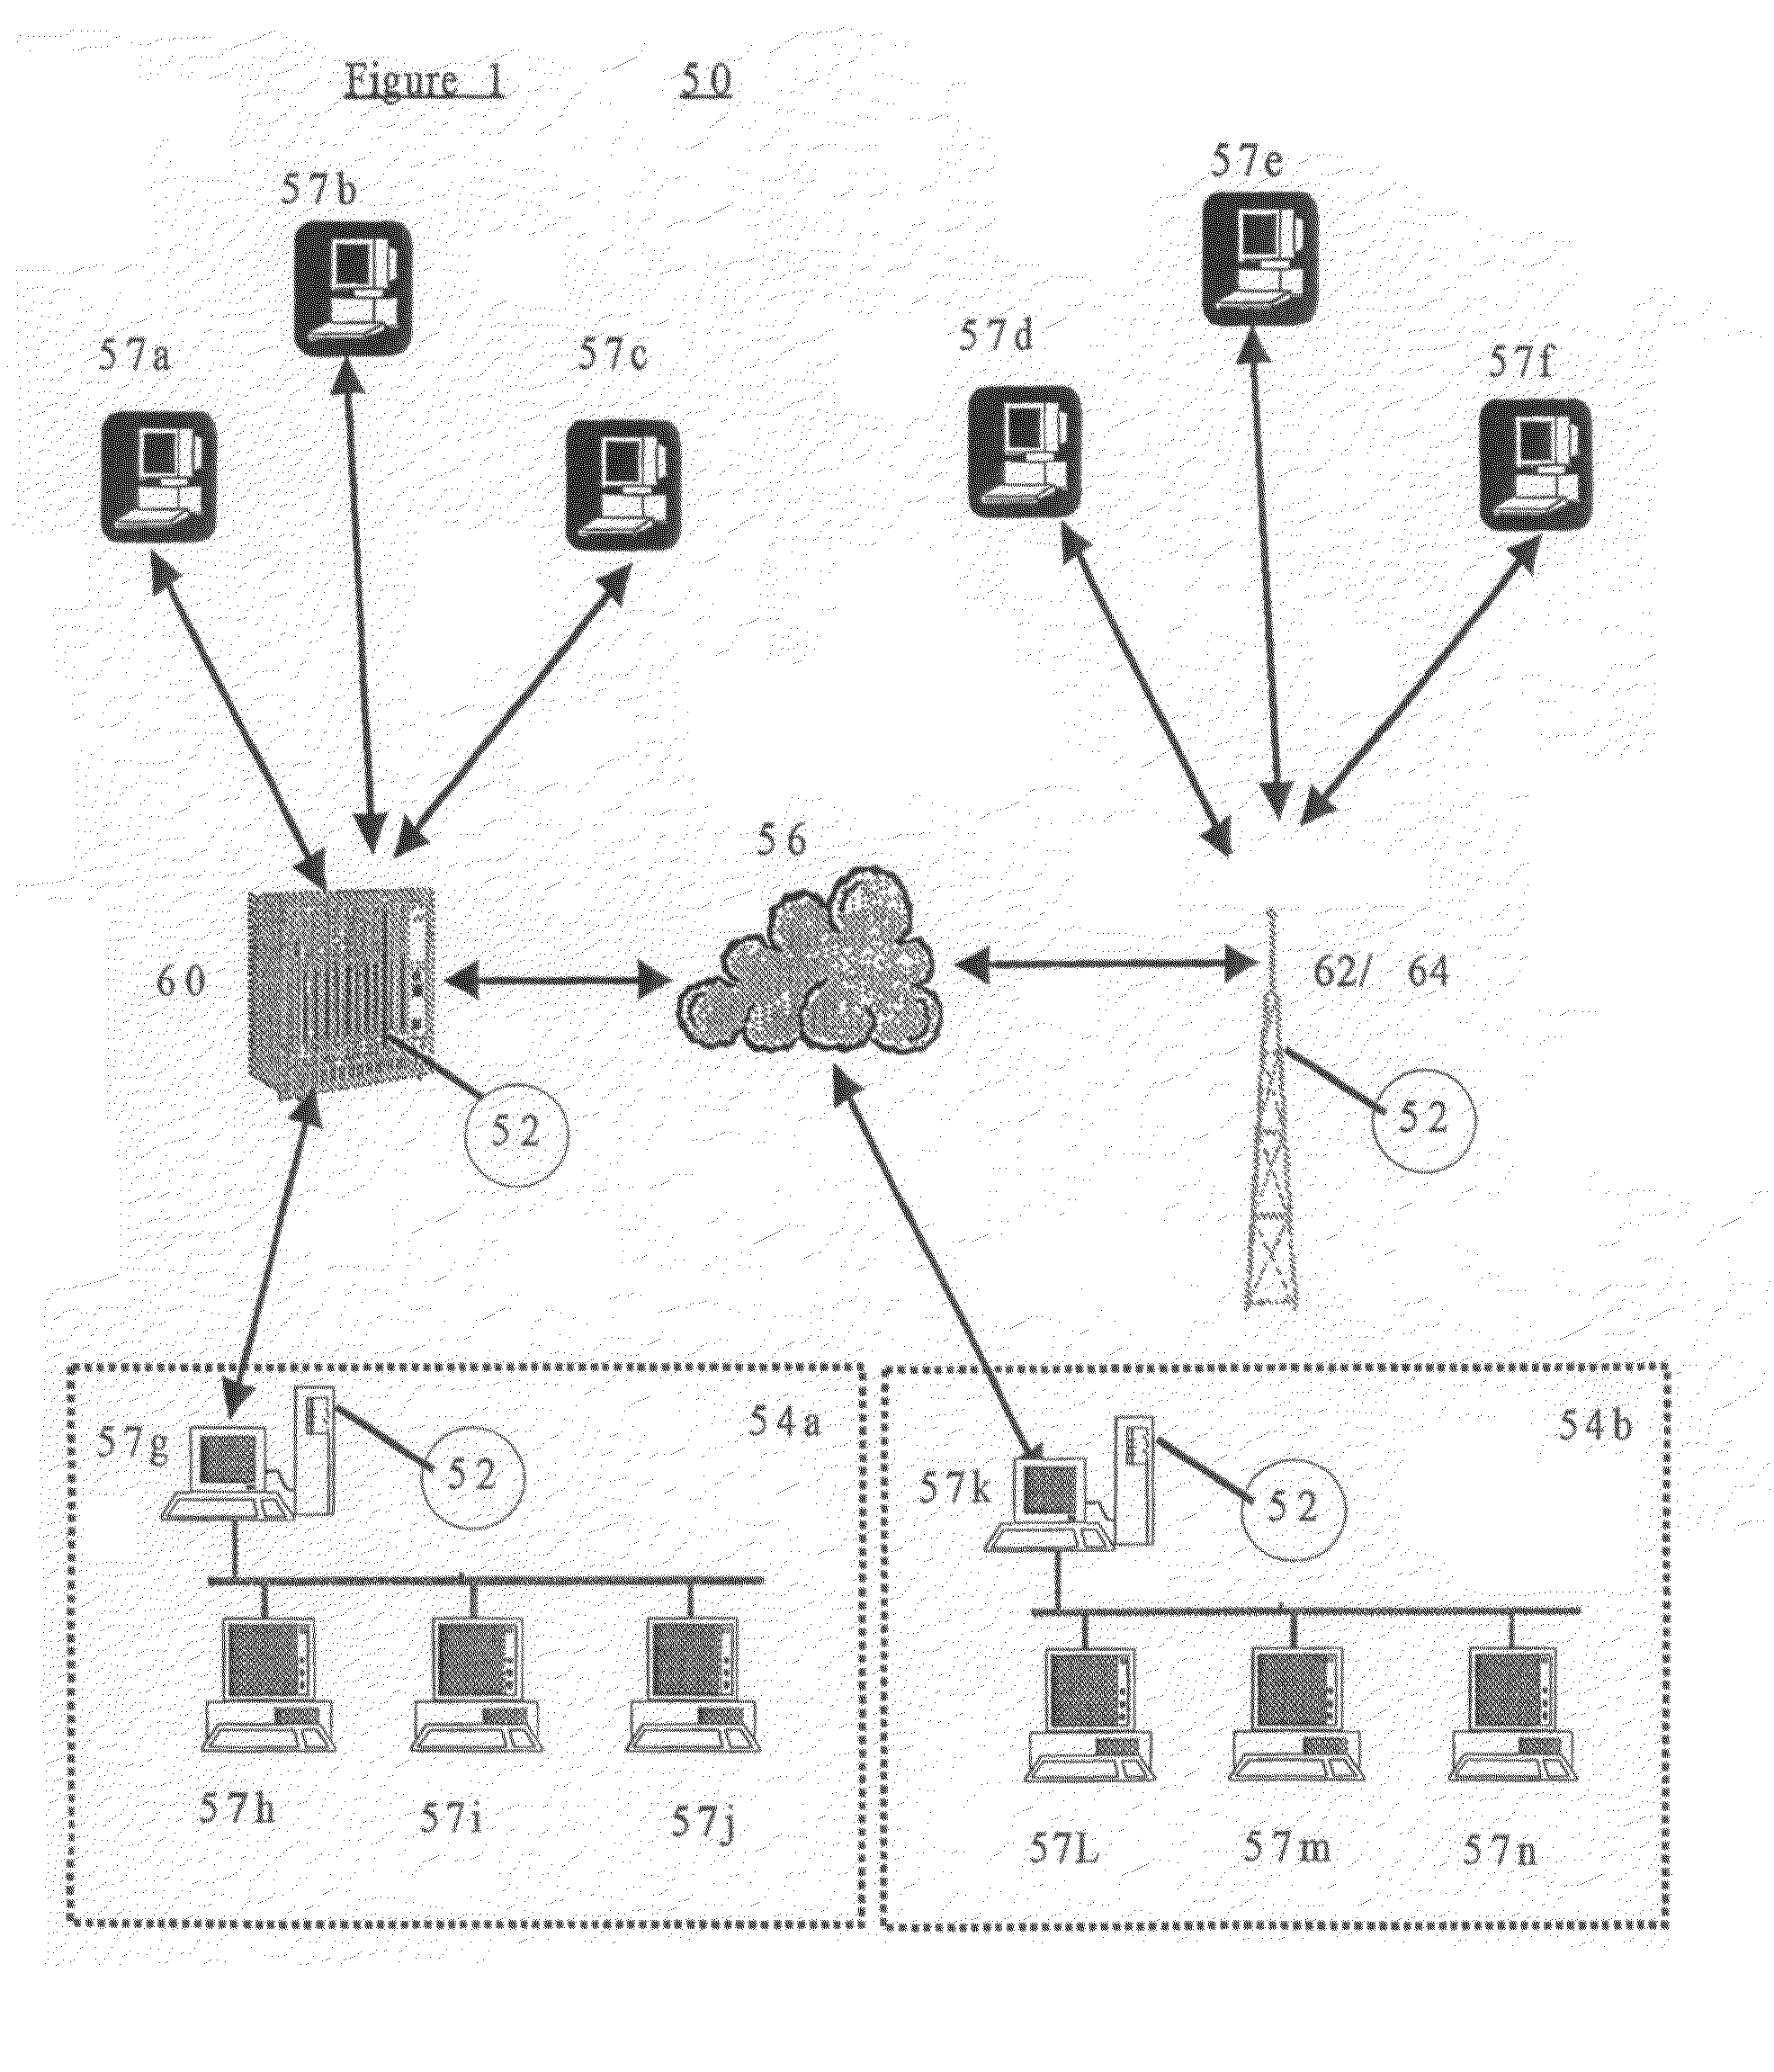 Method and system for accelerating receipt of data in a client to client network